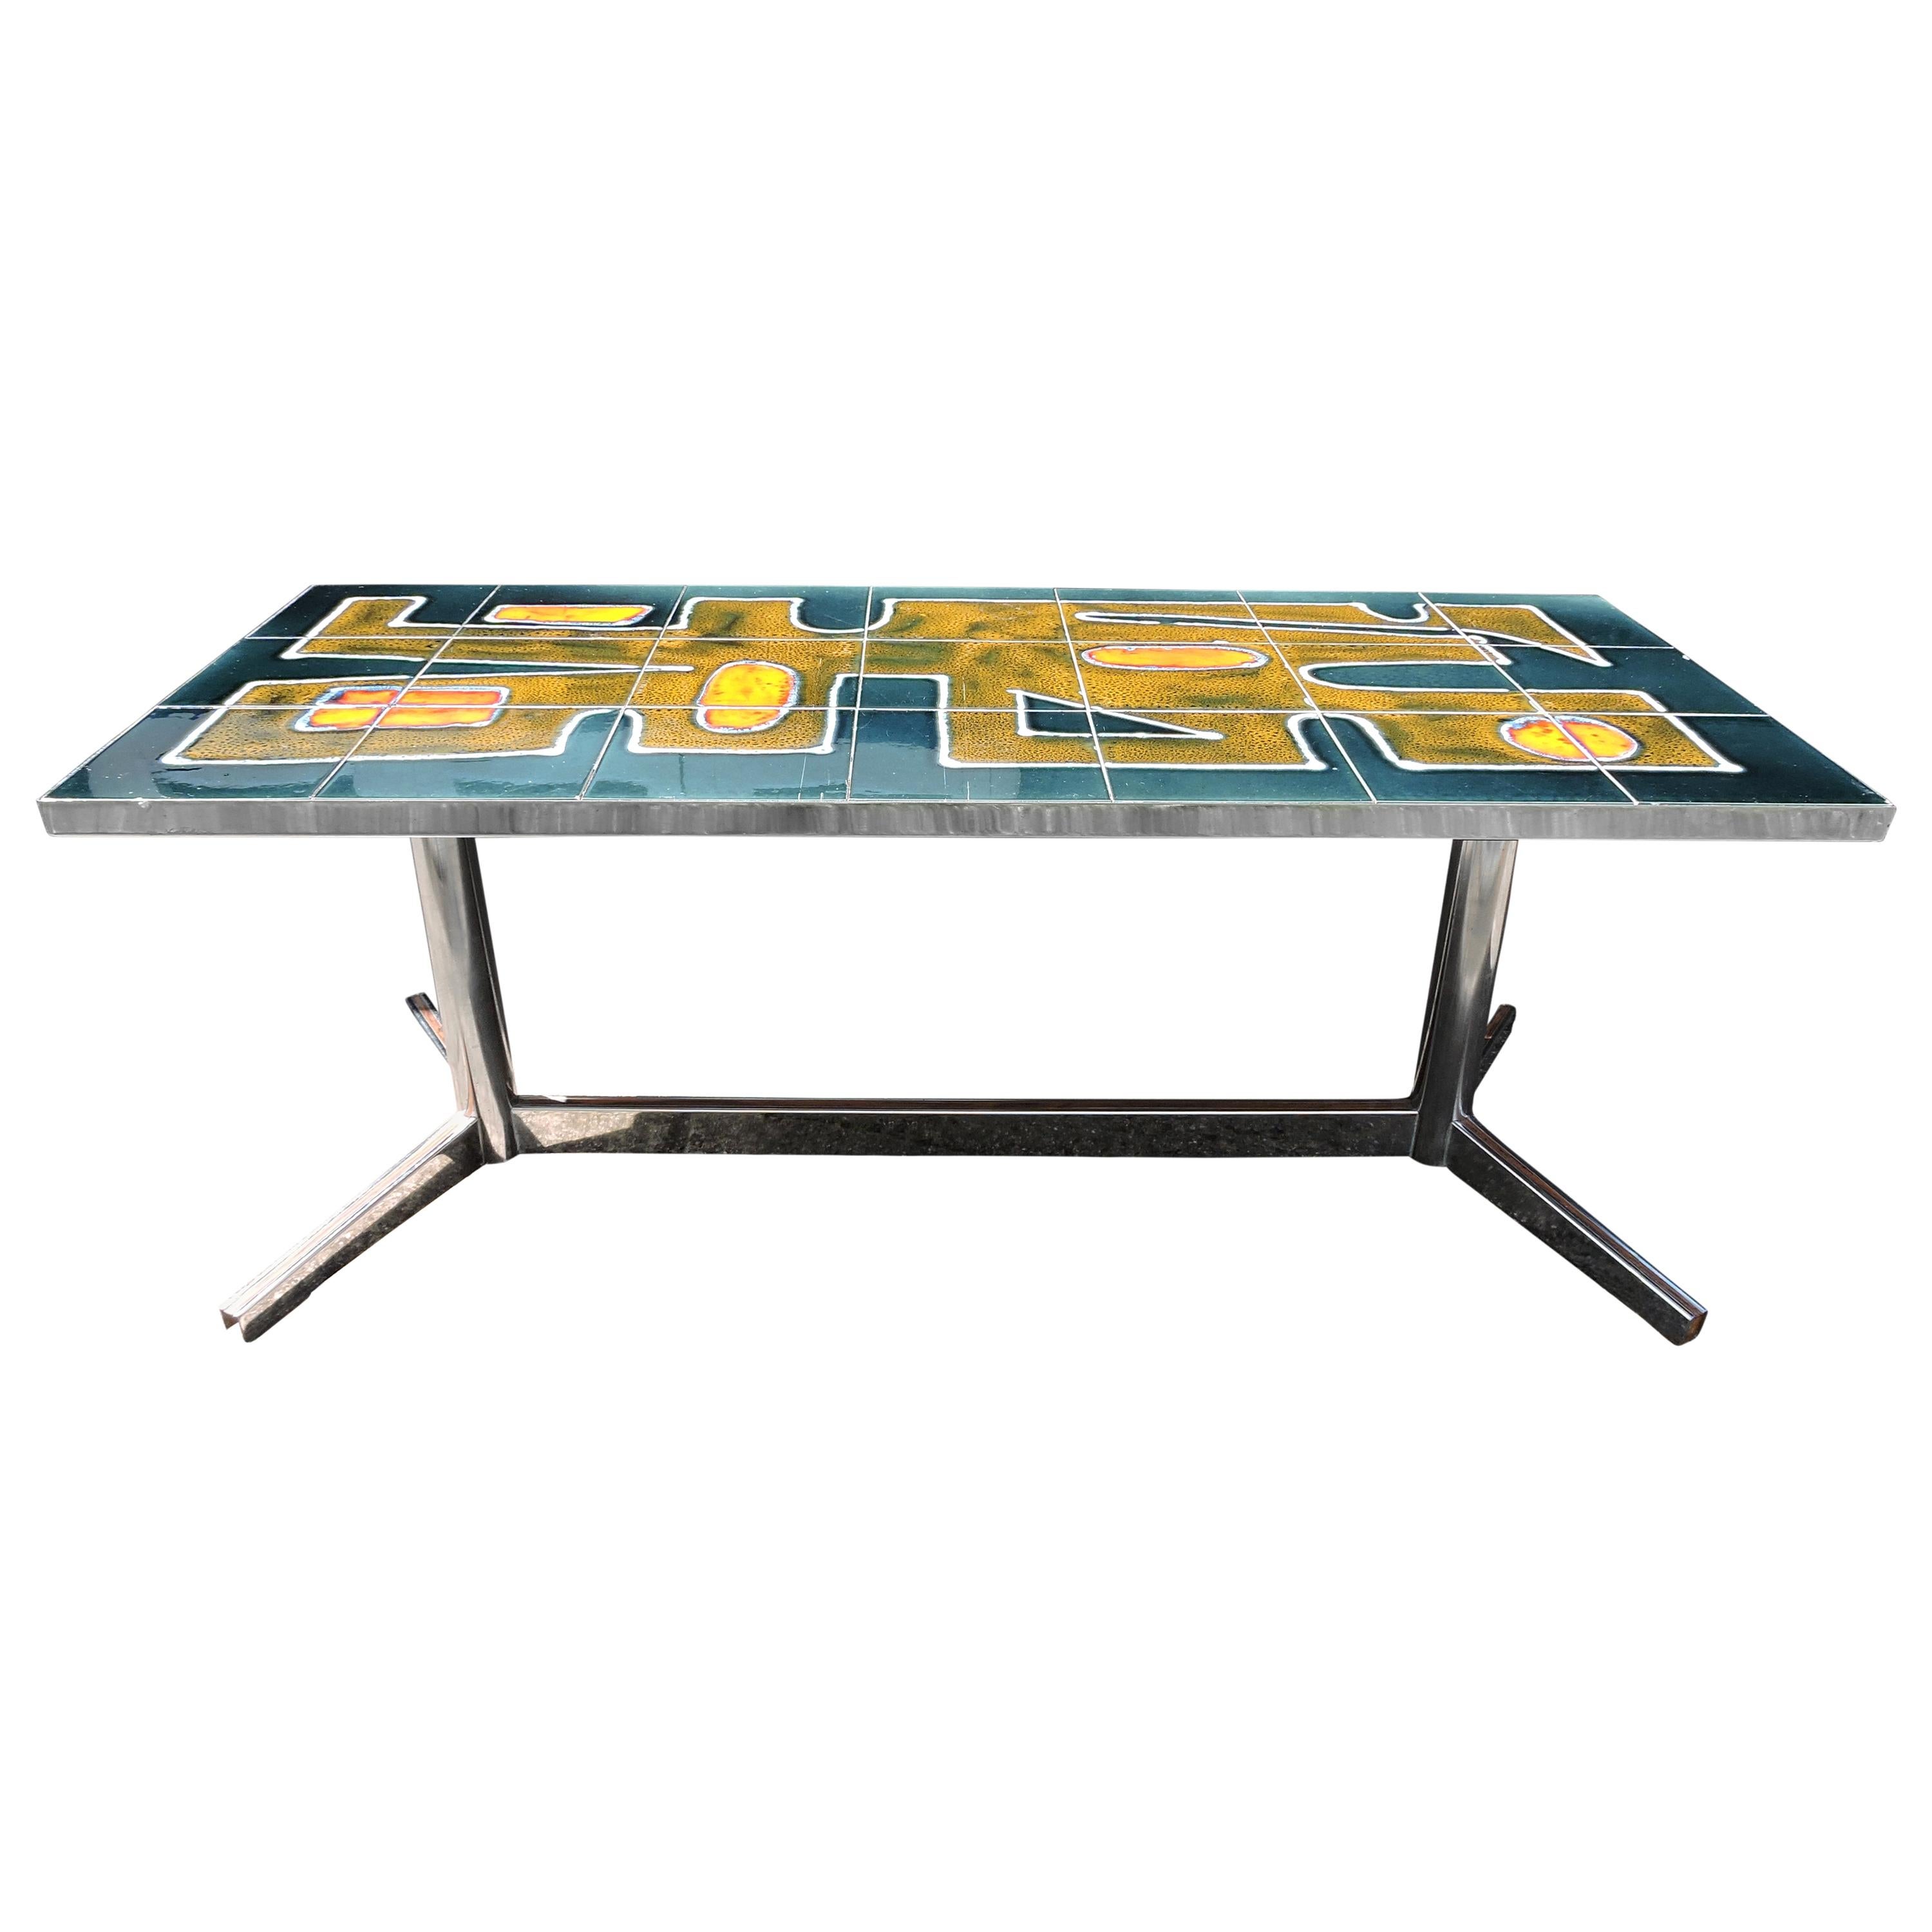 Decorative Tiled and Chrome Base Coffee Table, 1960s For Sale